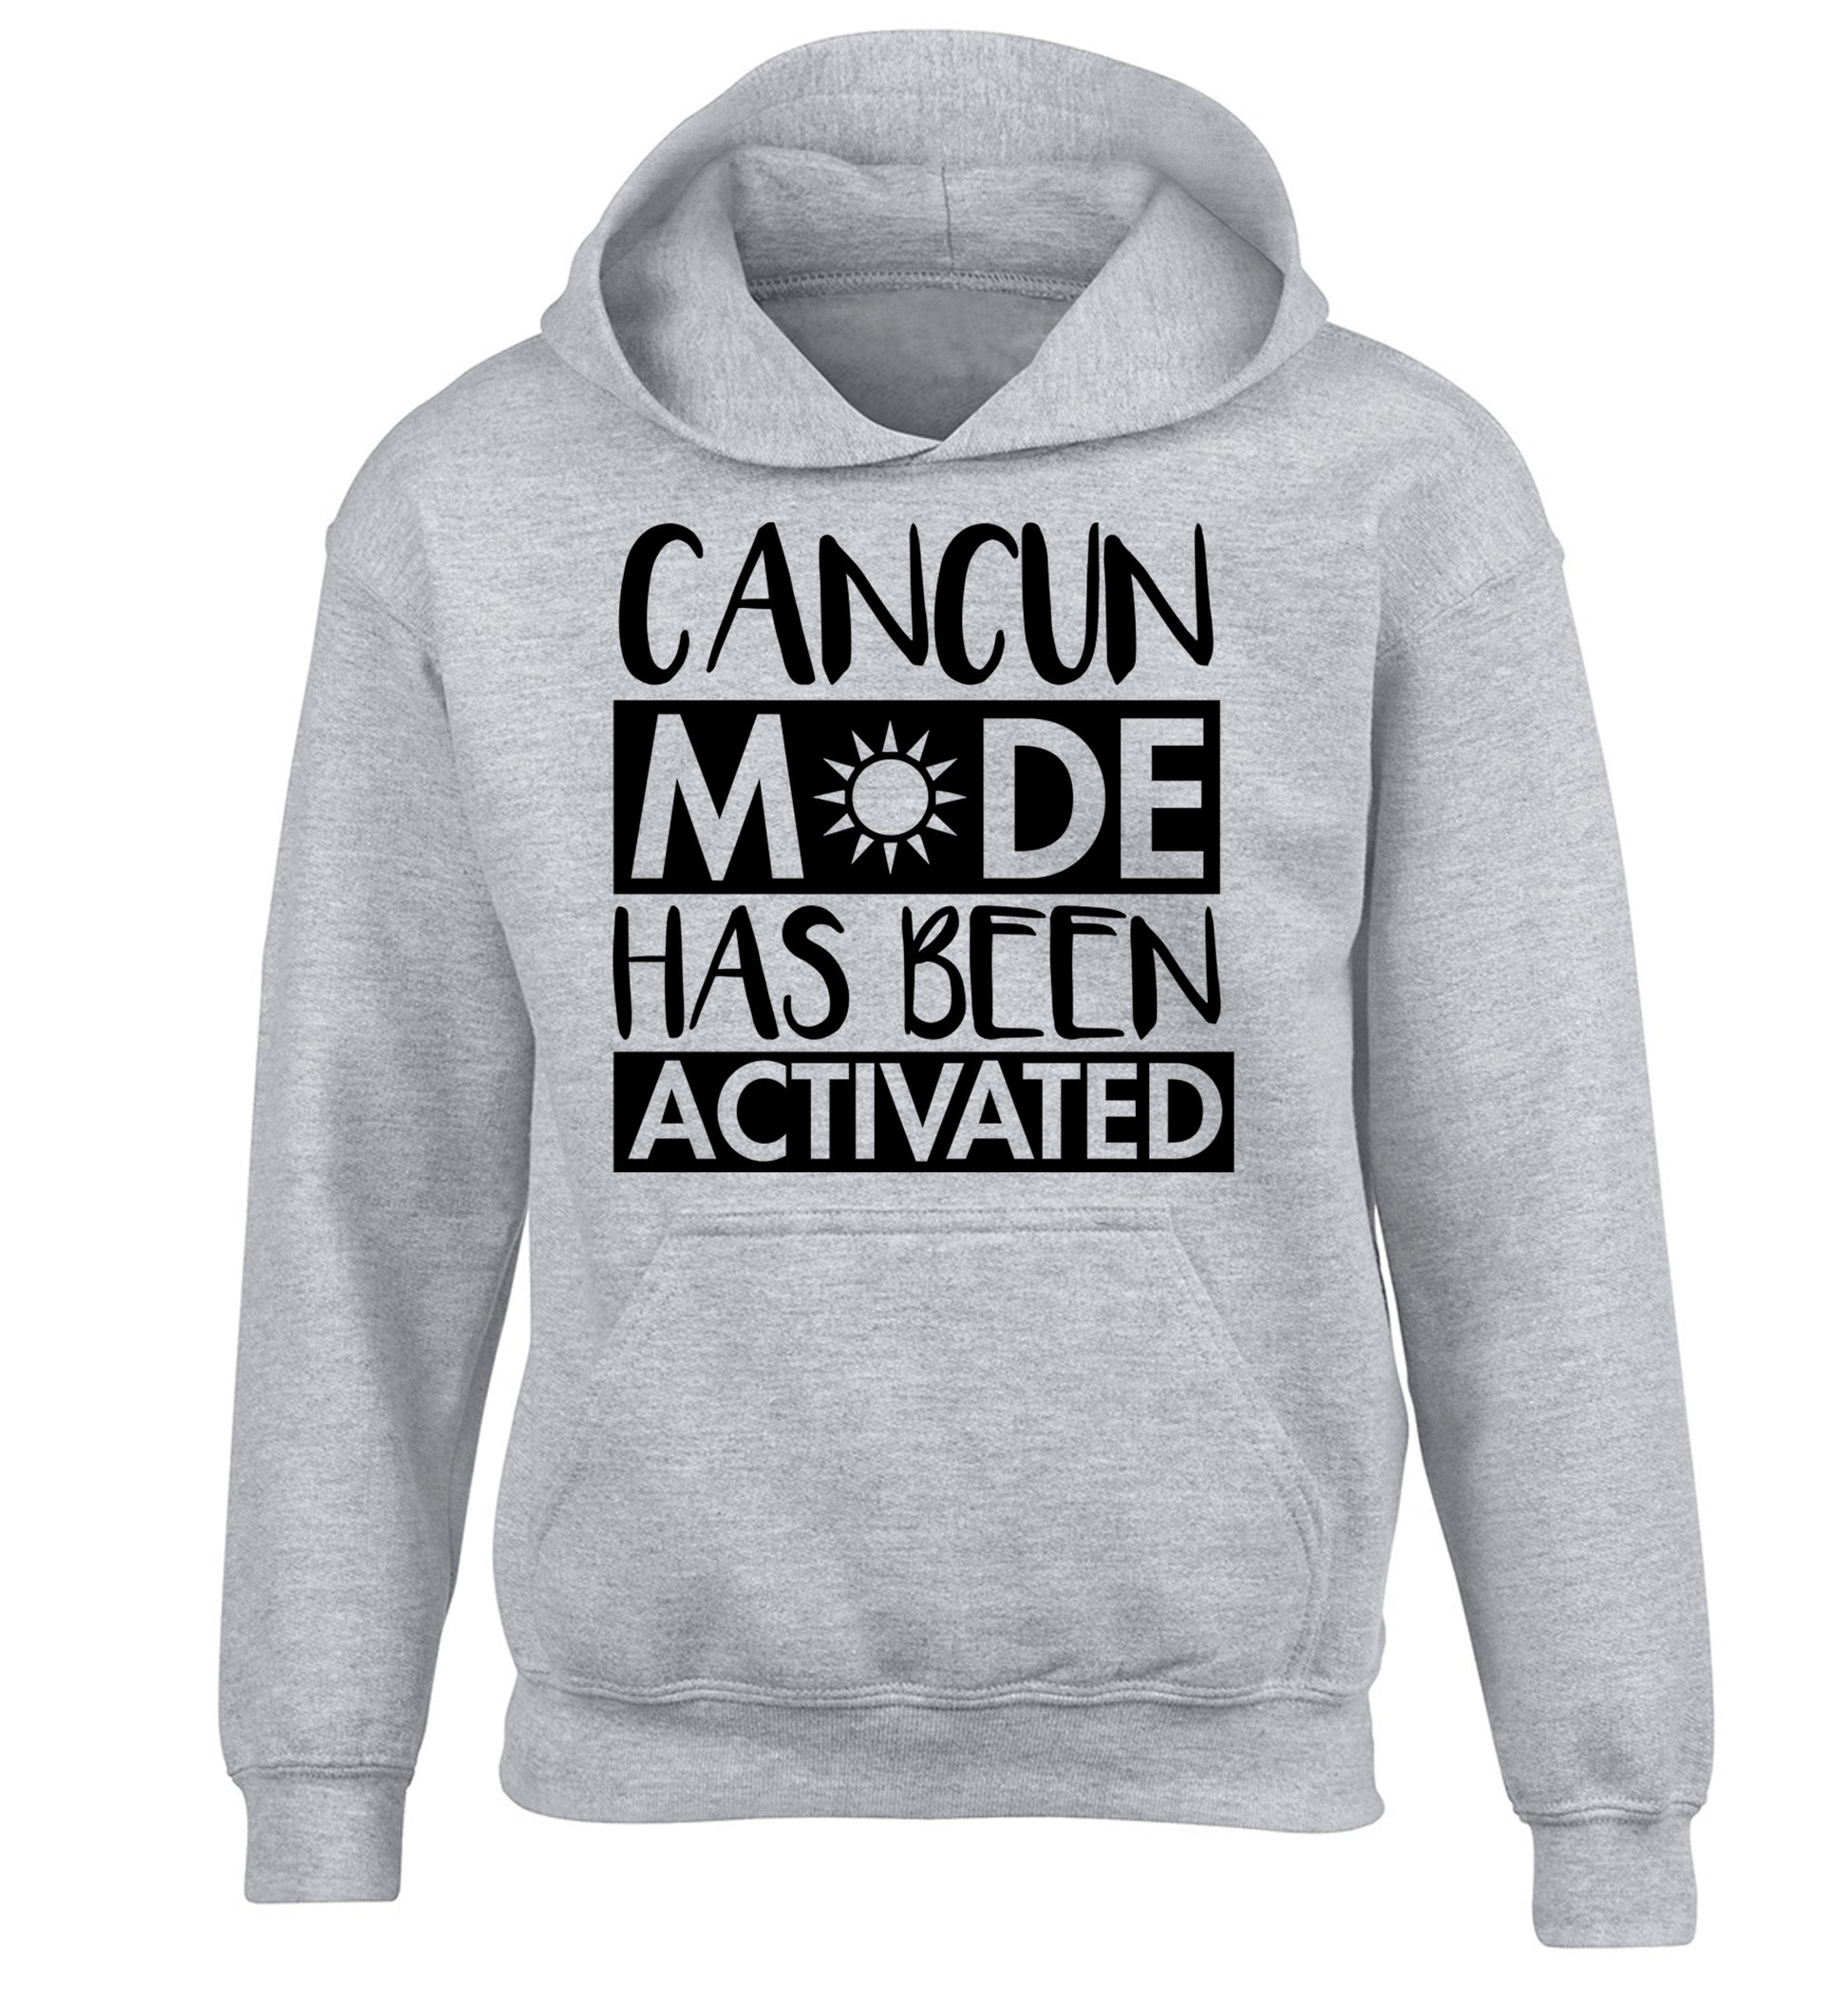 Cancun mode has been activated children's grey hoodie 12-14 Years